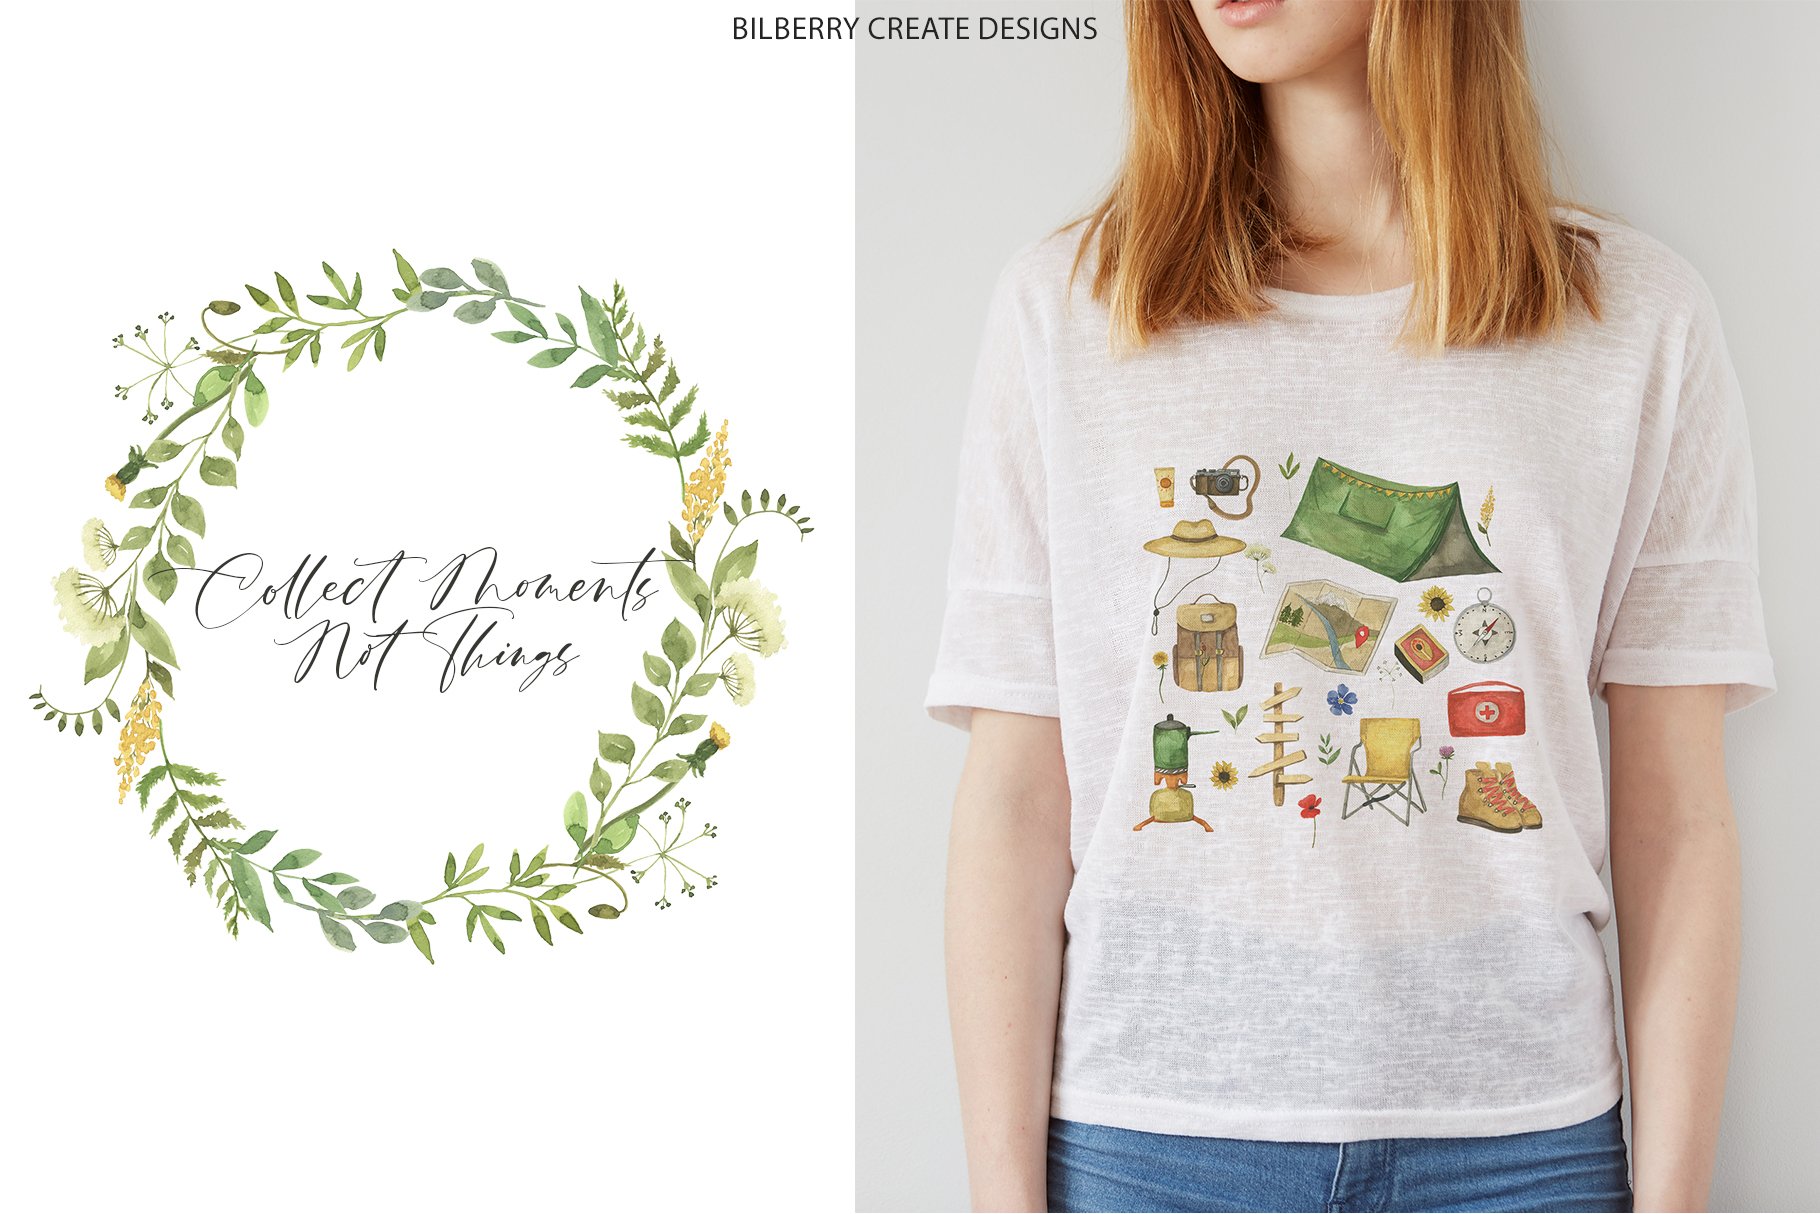 Classic white t-shirt with a camping print.